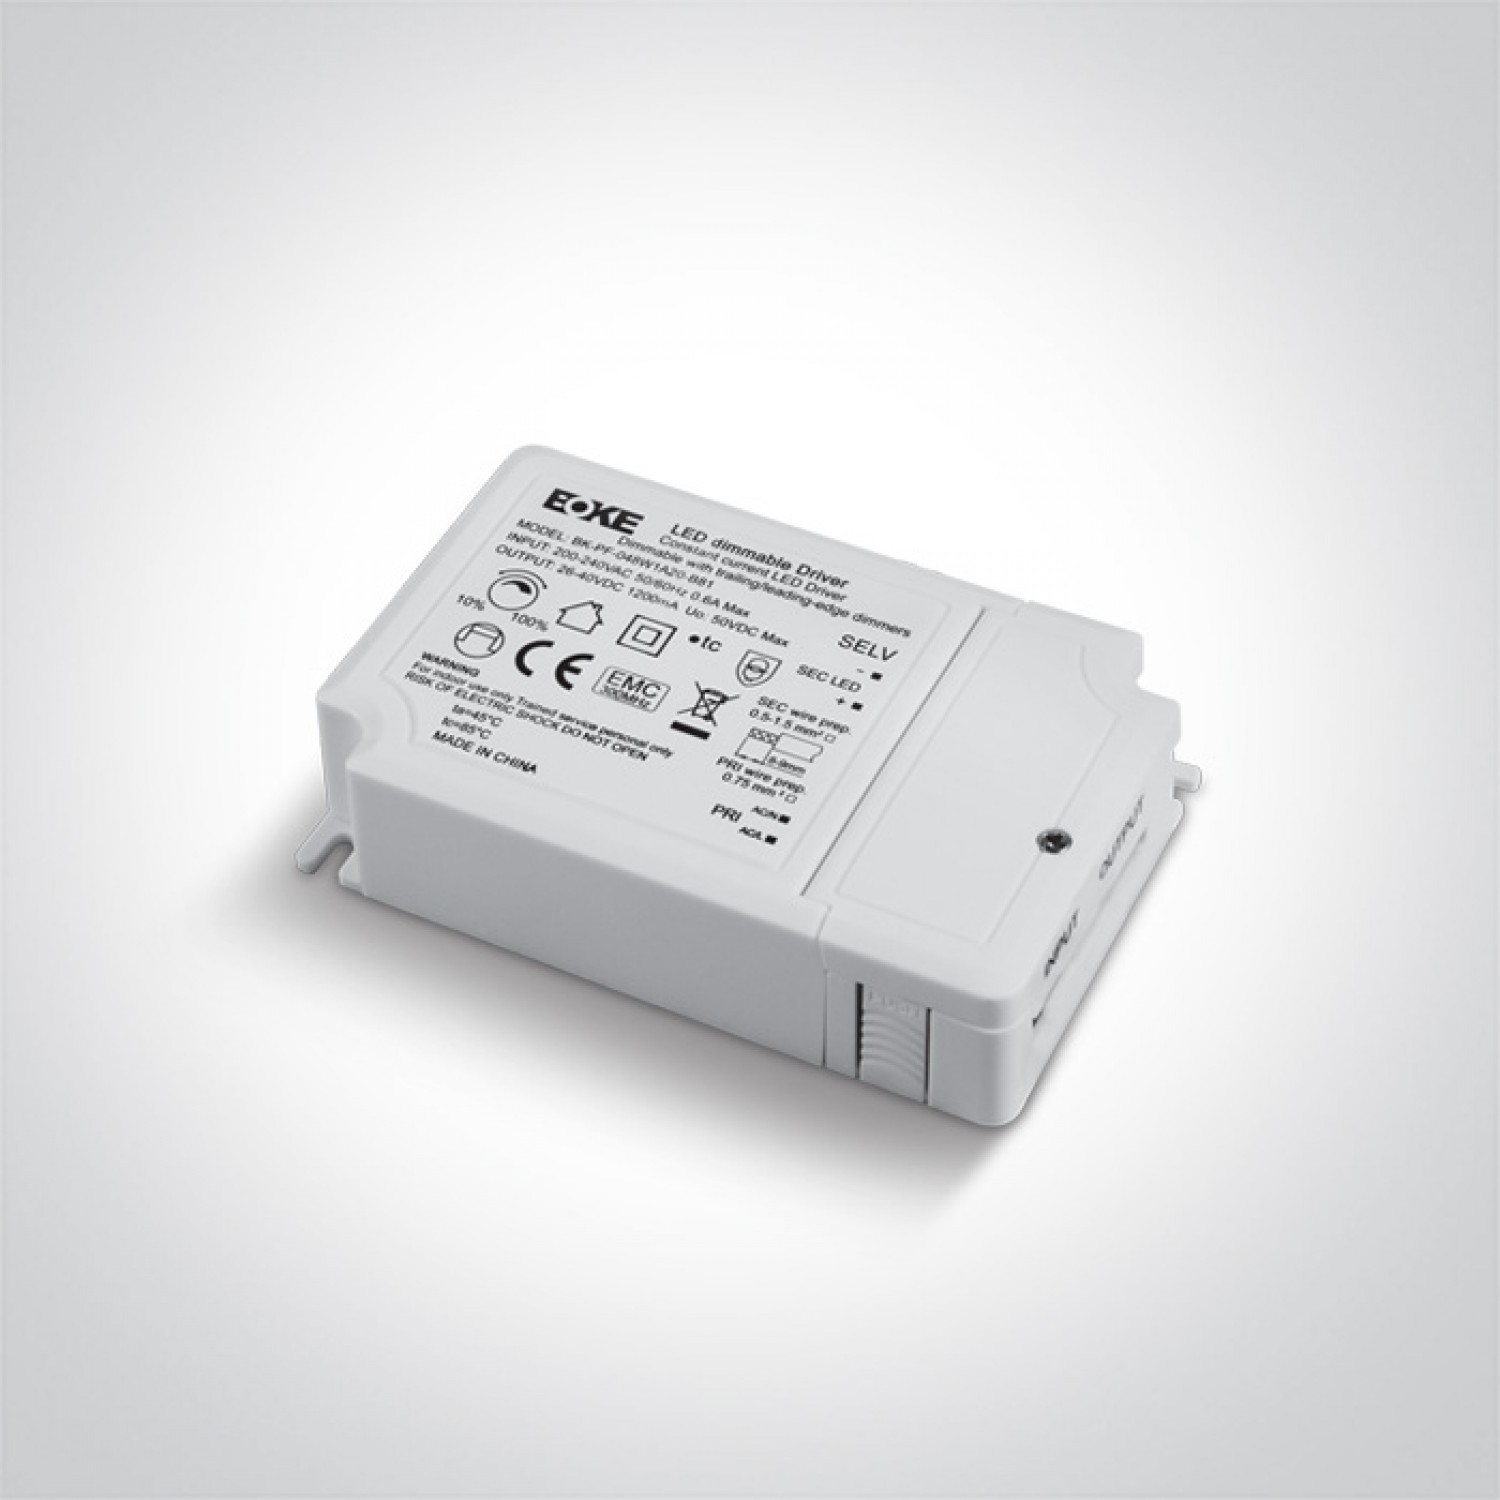 alt_image Драйвер ONE Light The 1200mA TRIAC Dimmable Range Constant current 89048T